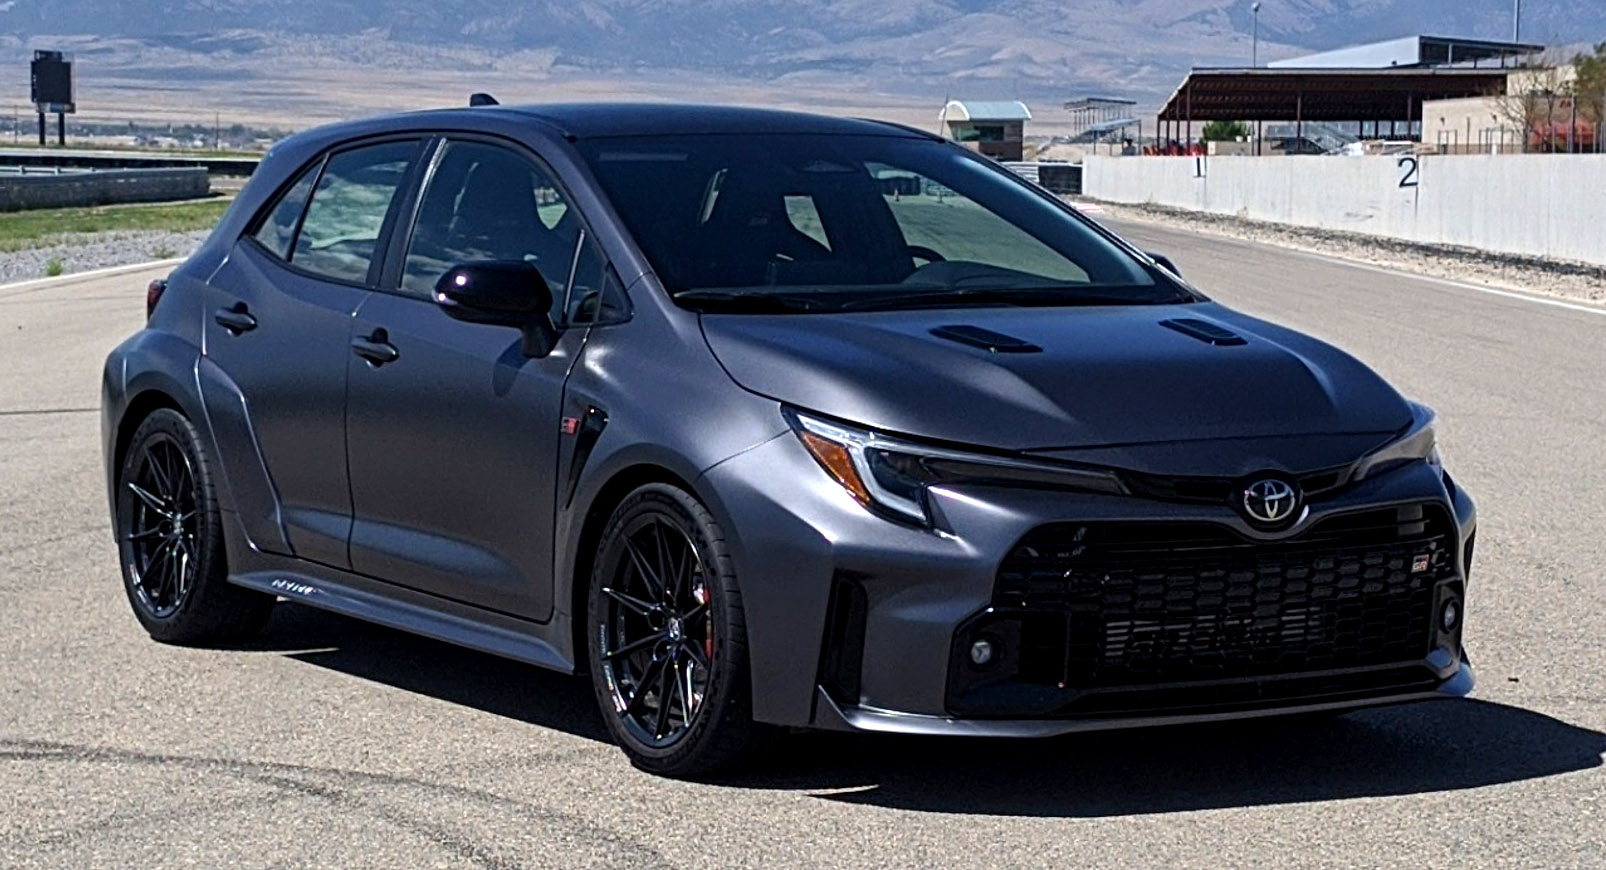 The 2023 GR Corolla is Making its Debut